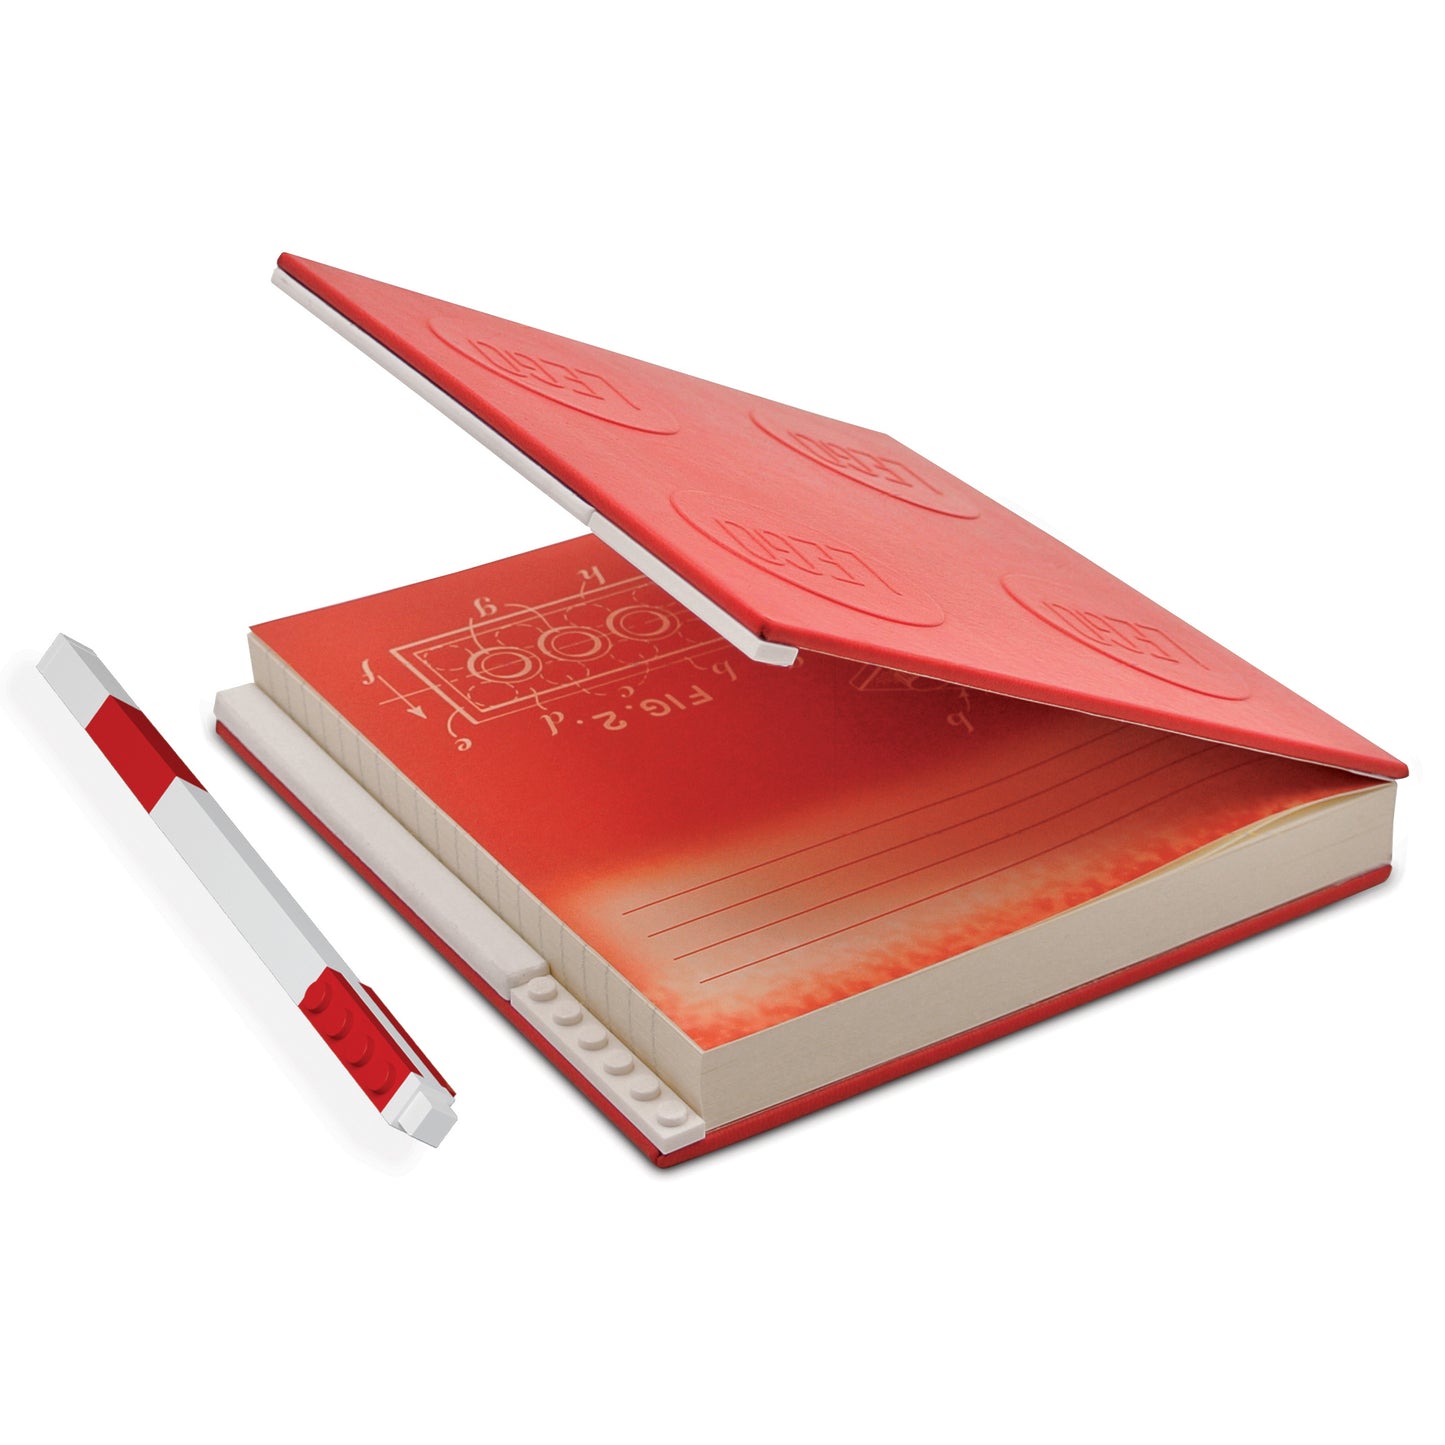 IQ LEGO® 2.0 Stationery Locking Notebook with Color-Matched Gel Pen - Red (52439)